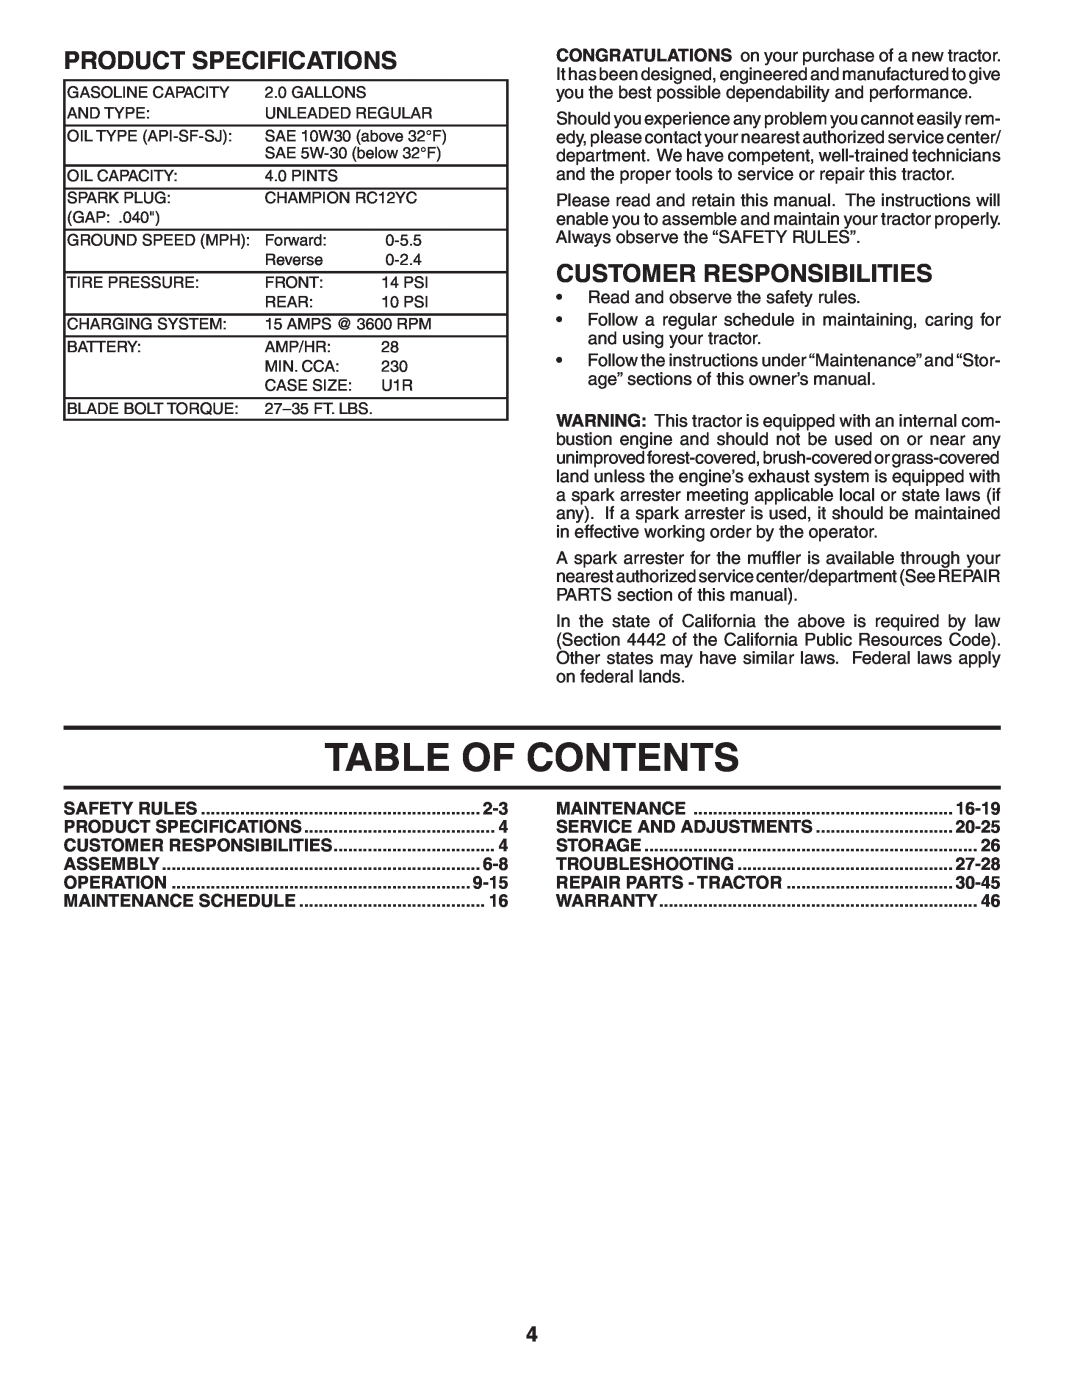 Poulan 184581 owner manual Table Of Contents, Product Specifications, Customer Responsibilities 